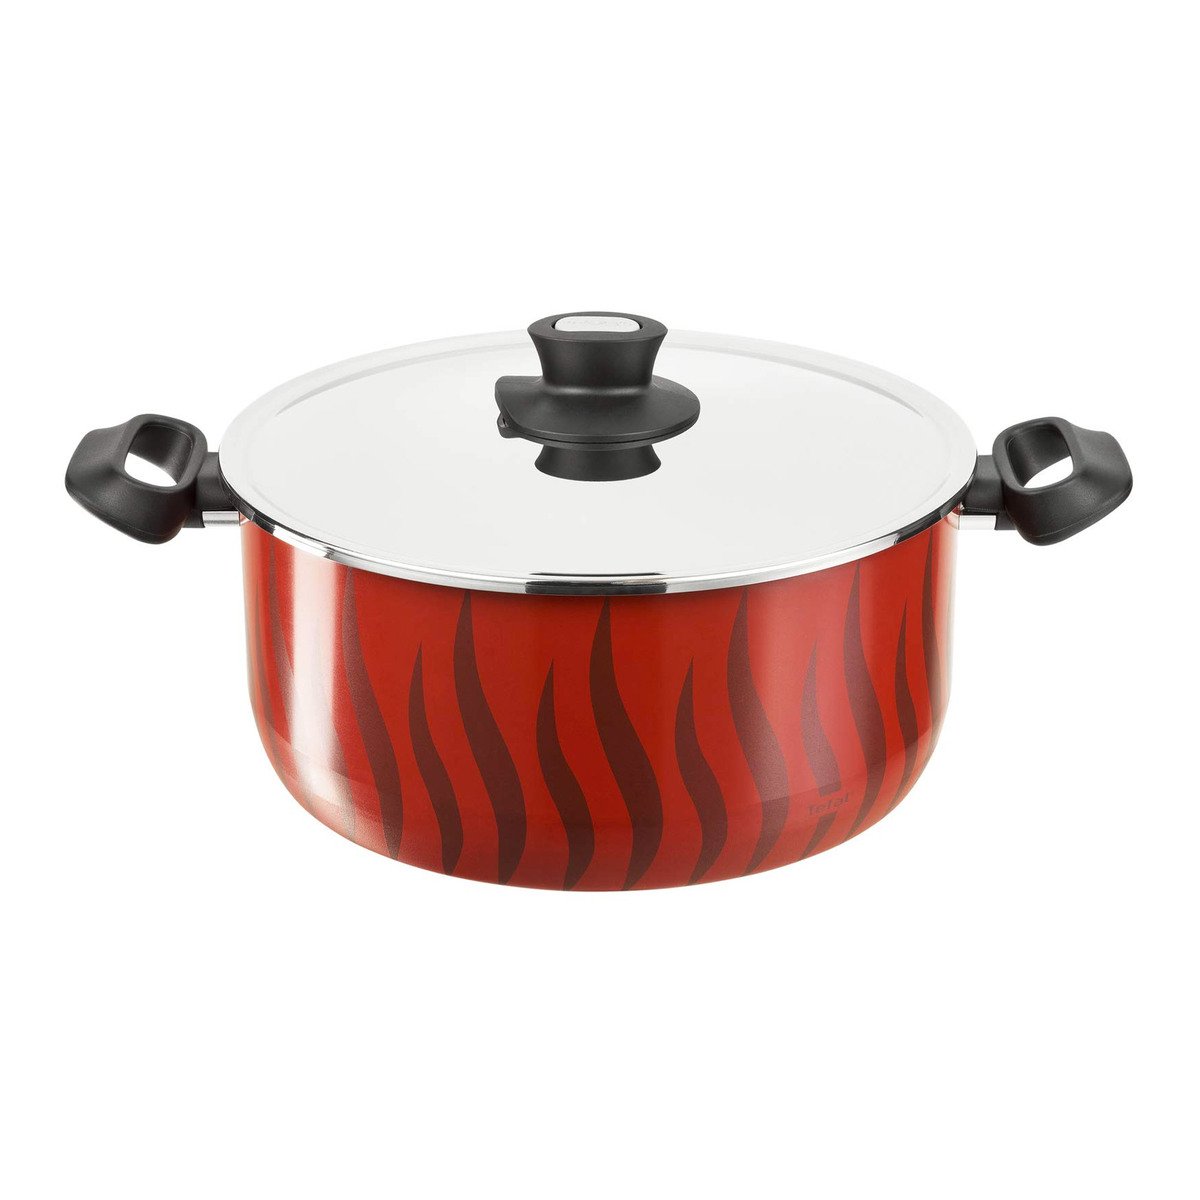 Tefal Tempo Flame Non-Stick Dutch Oven With Lid C5484582 22cm